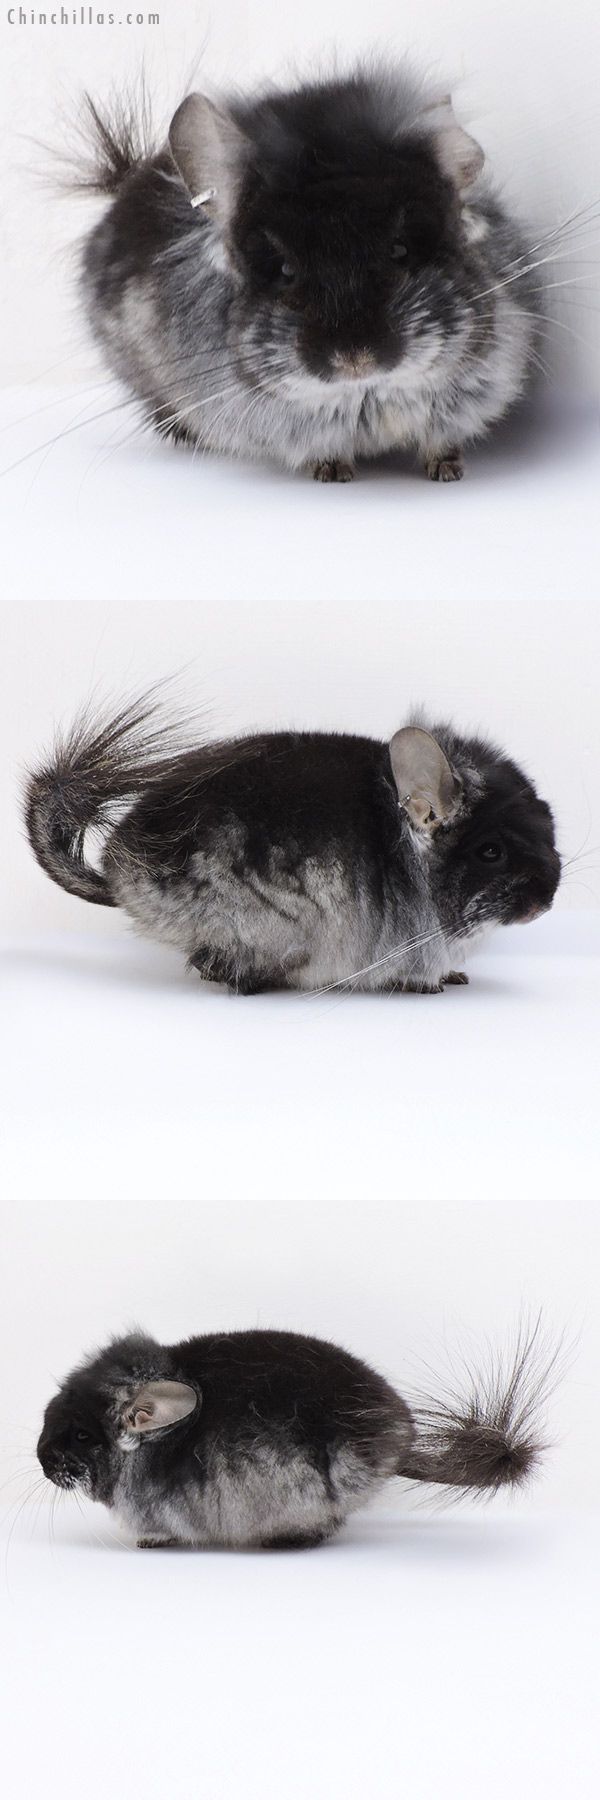 Chinchilla or related item offered for sale or export on Chinchillas.com - 18274 Black Velvet ( Violet Carrier )  Royal Persian Angora Male Chinchilla